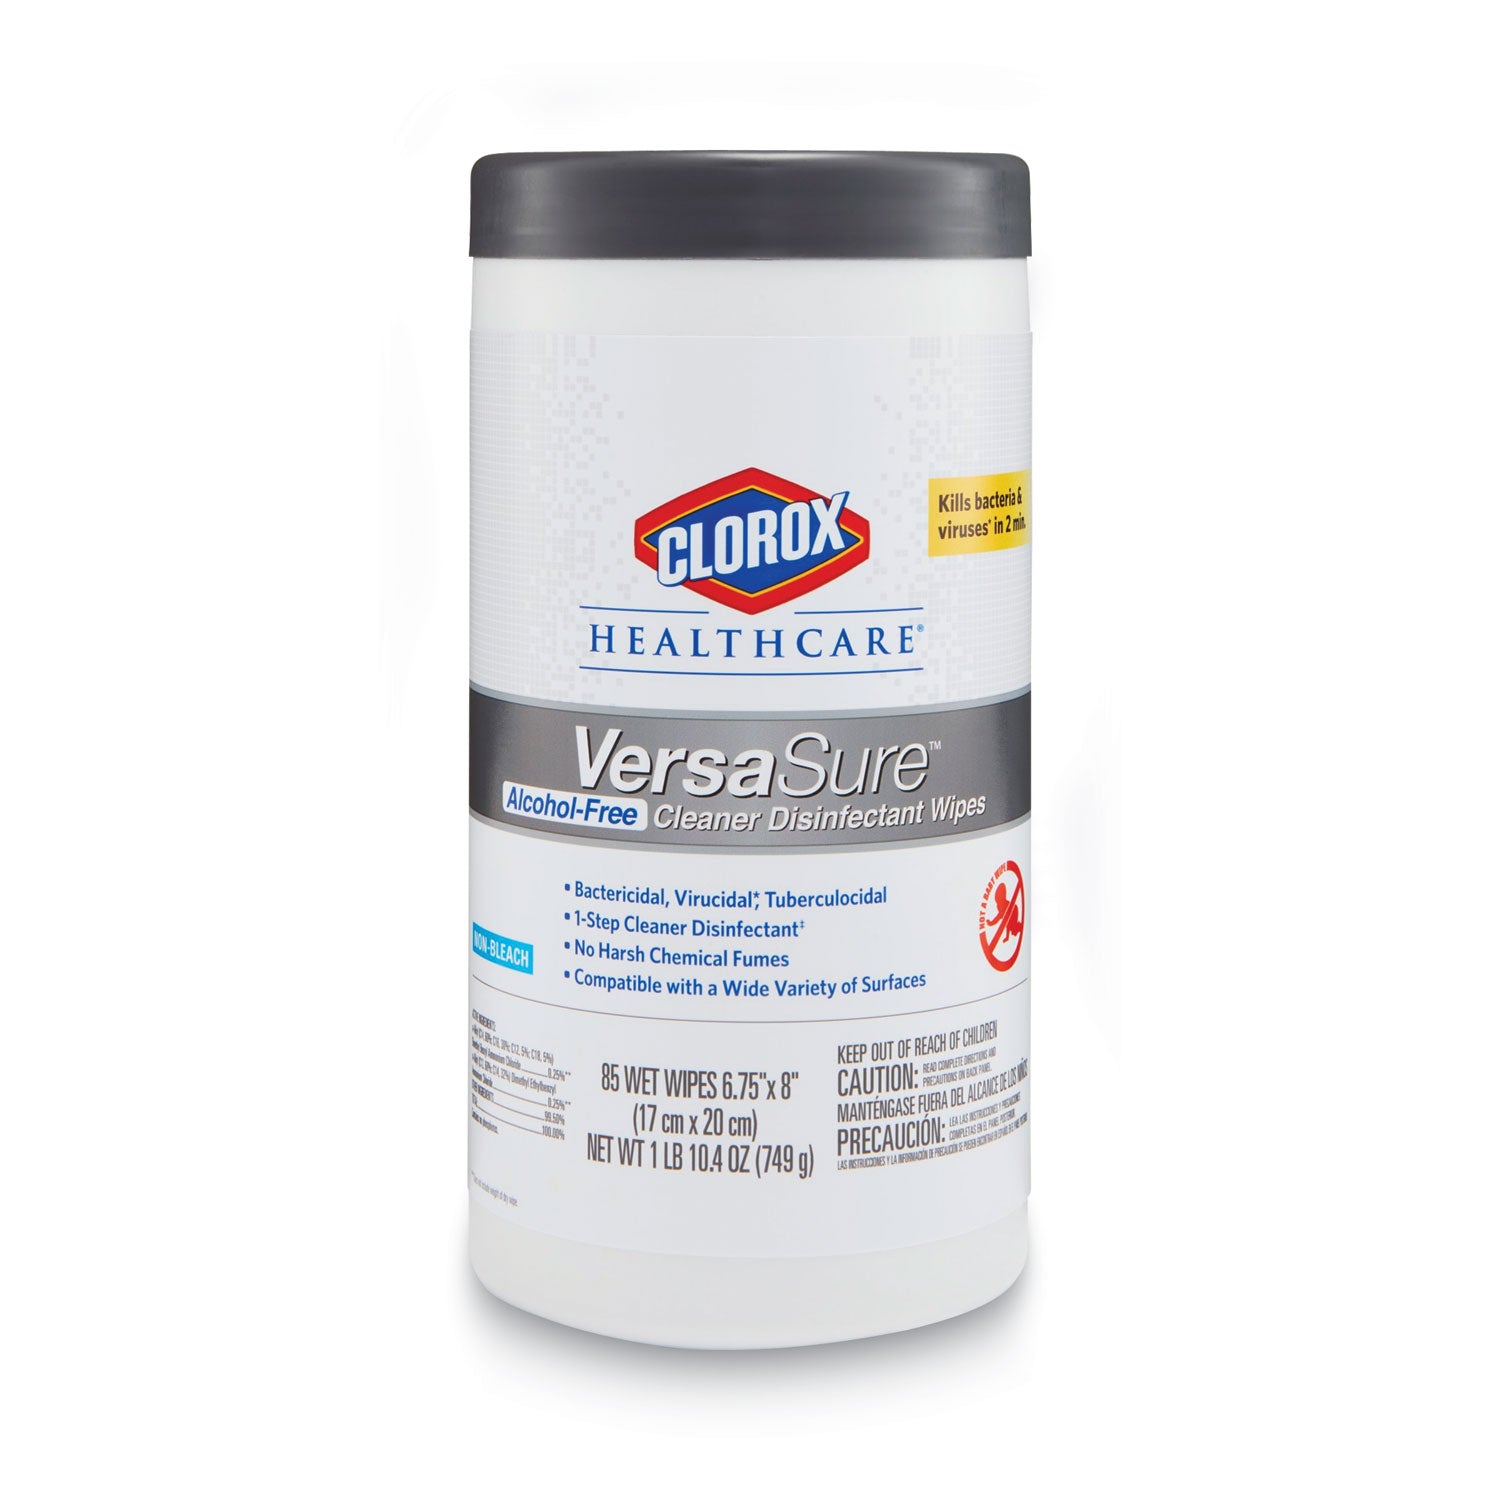 versasure-cleaner-disinfectant-wipes-1-ply-675-x-8-fragranced-white-85-canister-6-canisters-carton_clo31757 - 2